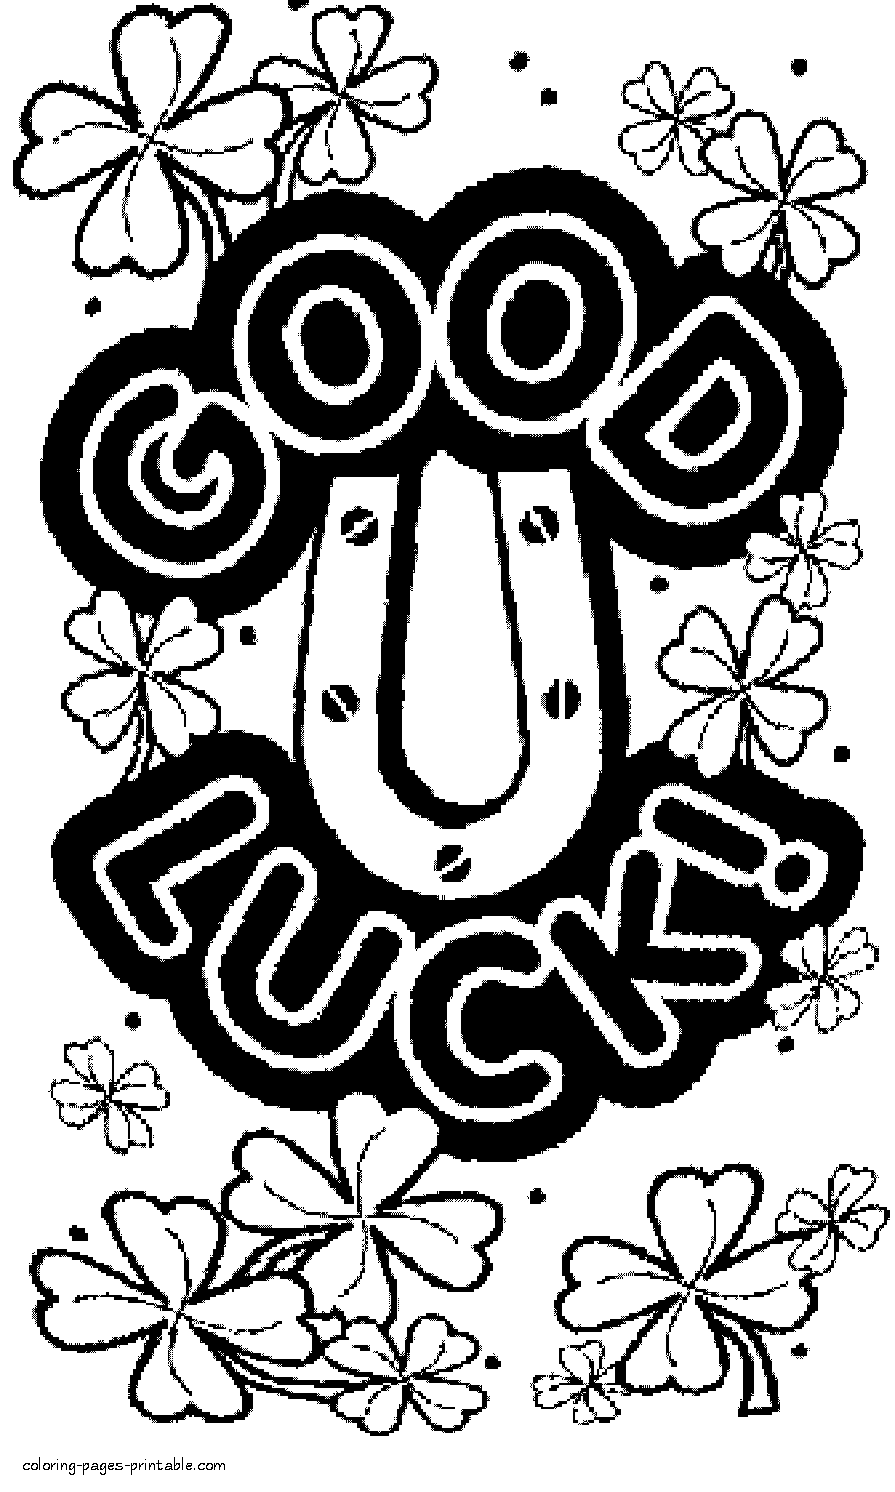 Good luck coloring page. Horseshoe and four-leaf clover